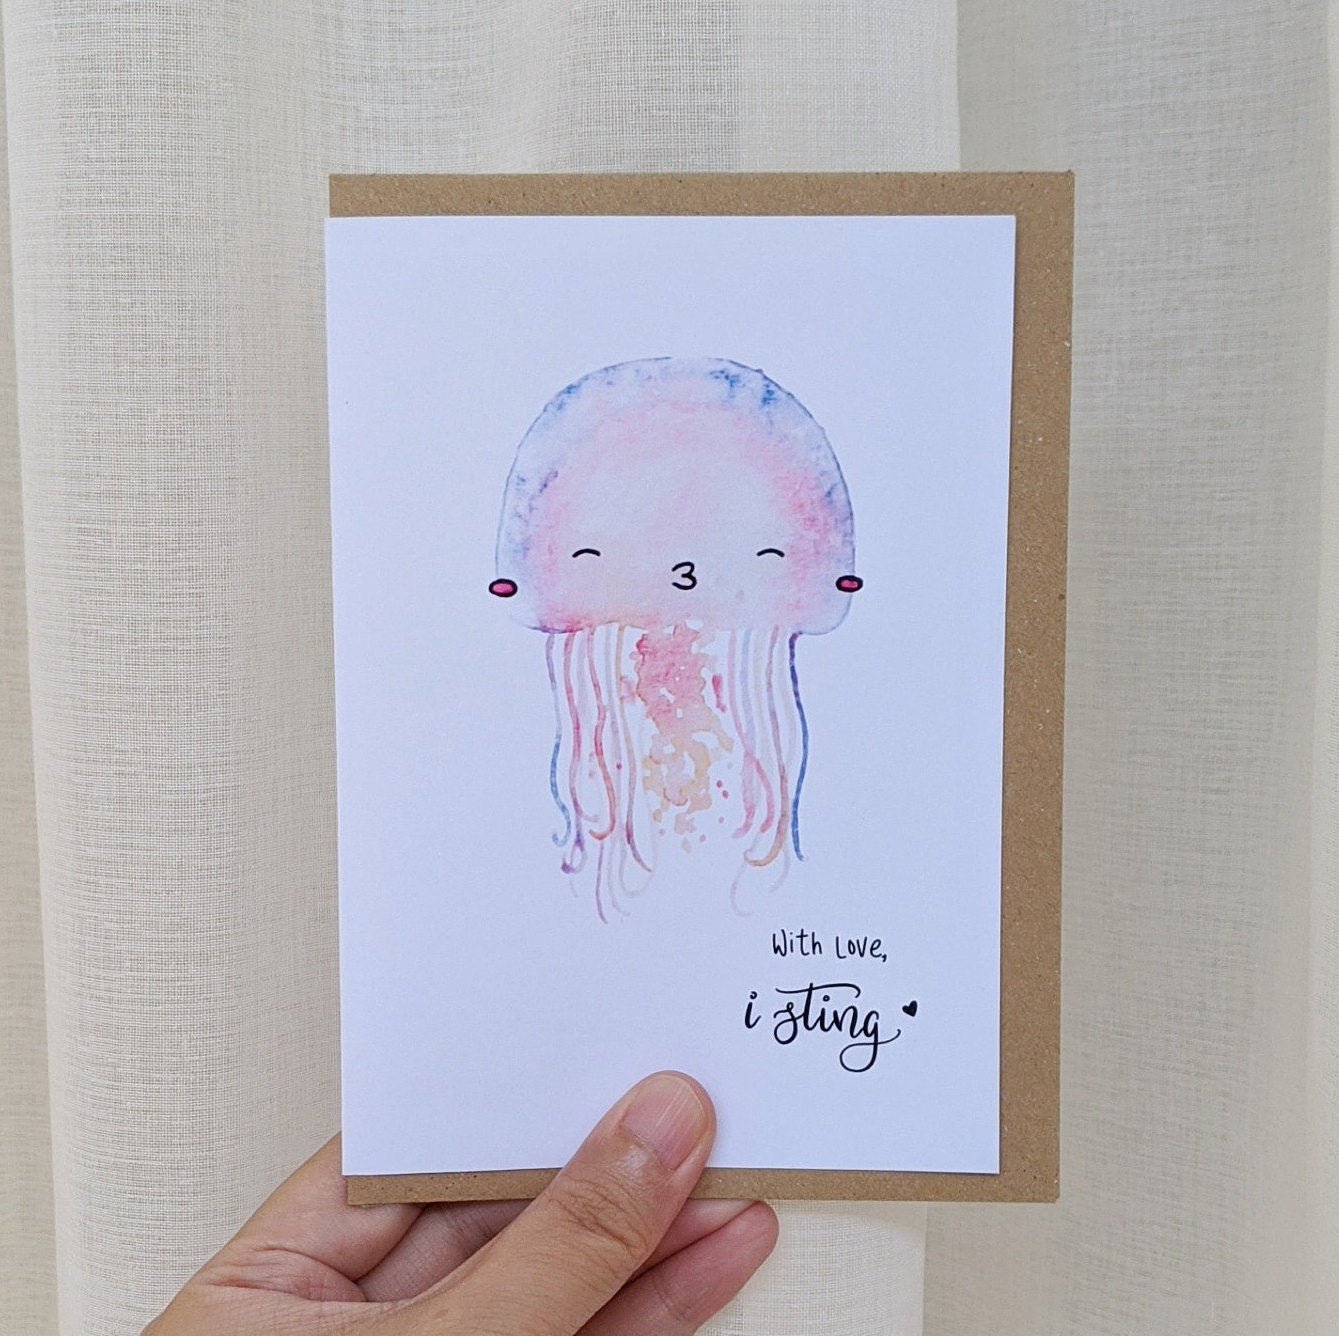 Greeting card of with watercolour illustration of a jellyfish kissing, signed off "with love, I sting" being held by a hand